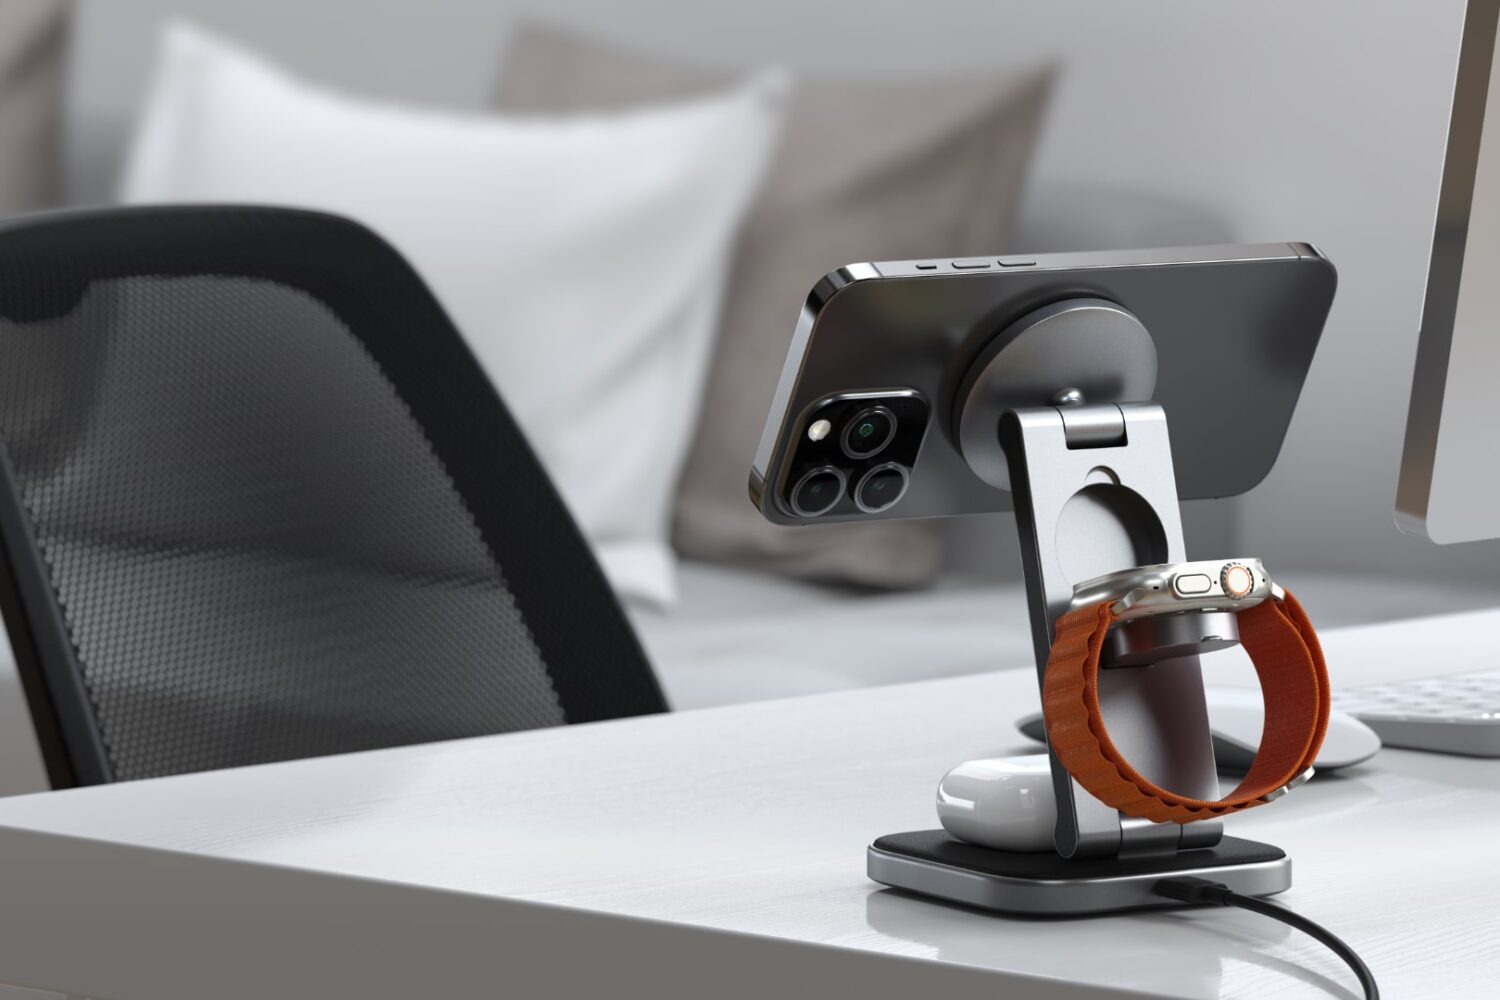 The back of Satechi's charging stand with an iPhone, AirPods and Apple Watch on it